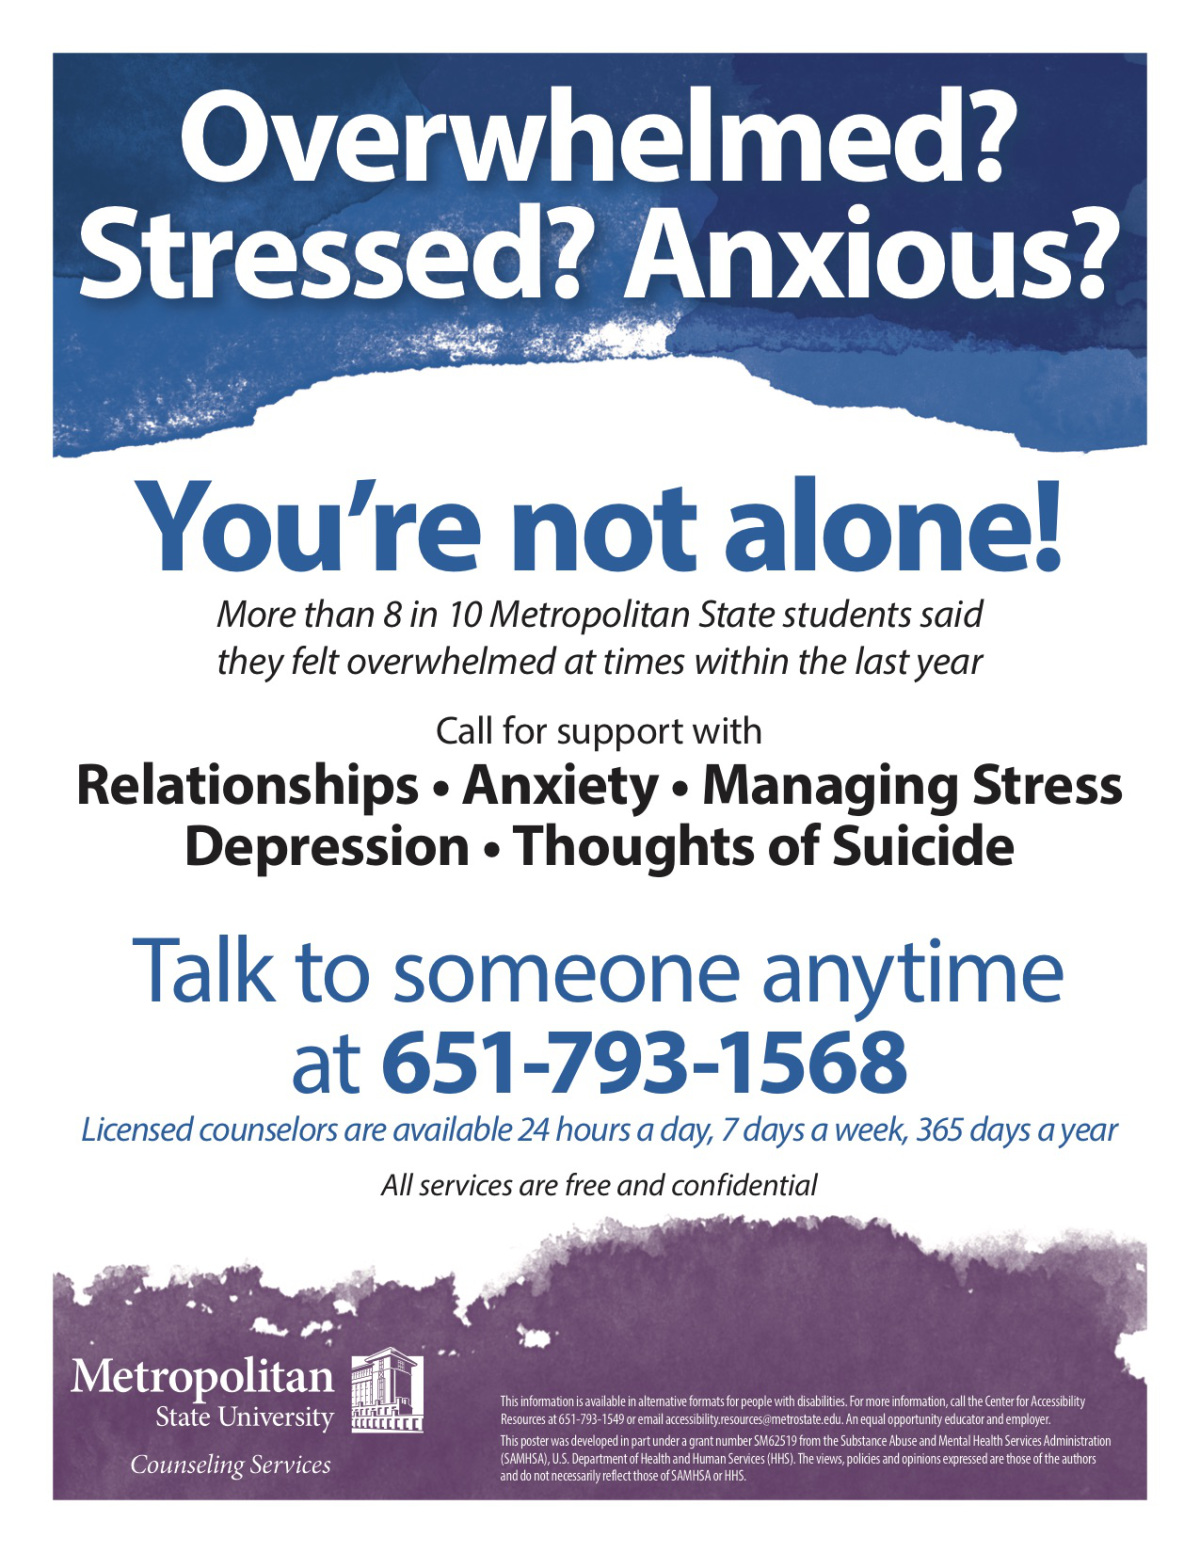 24/7 support from Counseling Services Metropolitan State